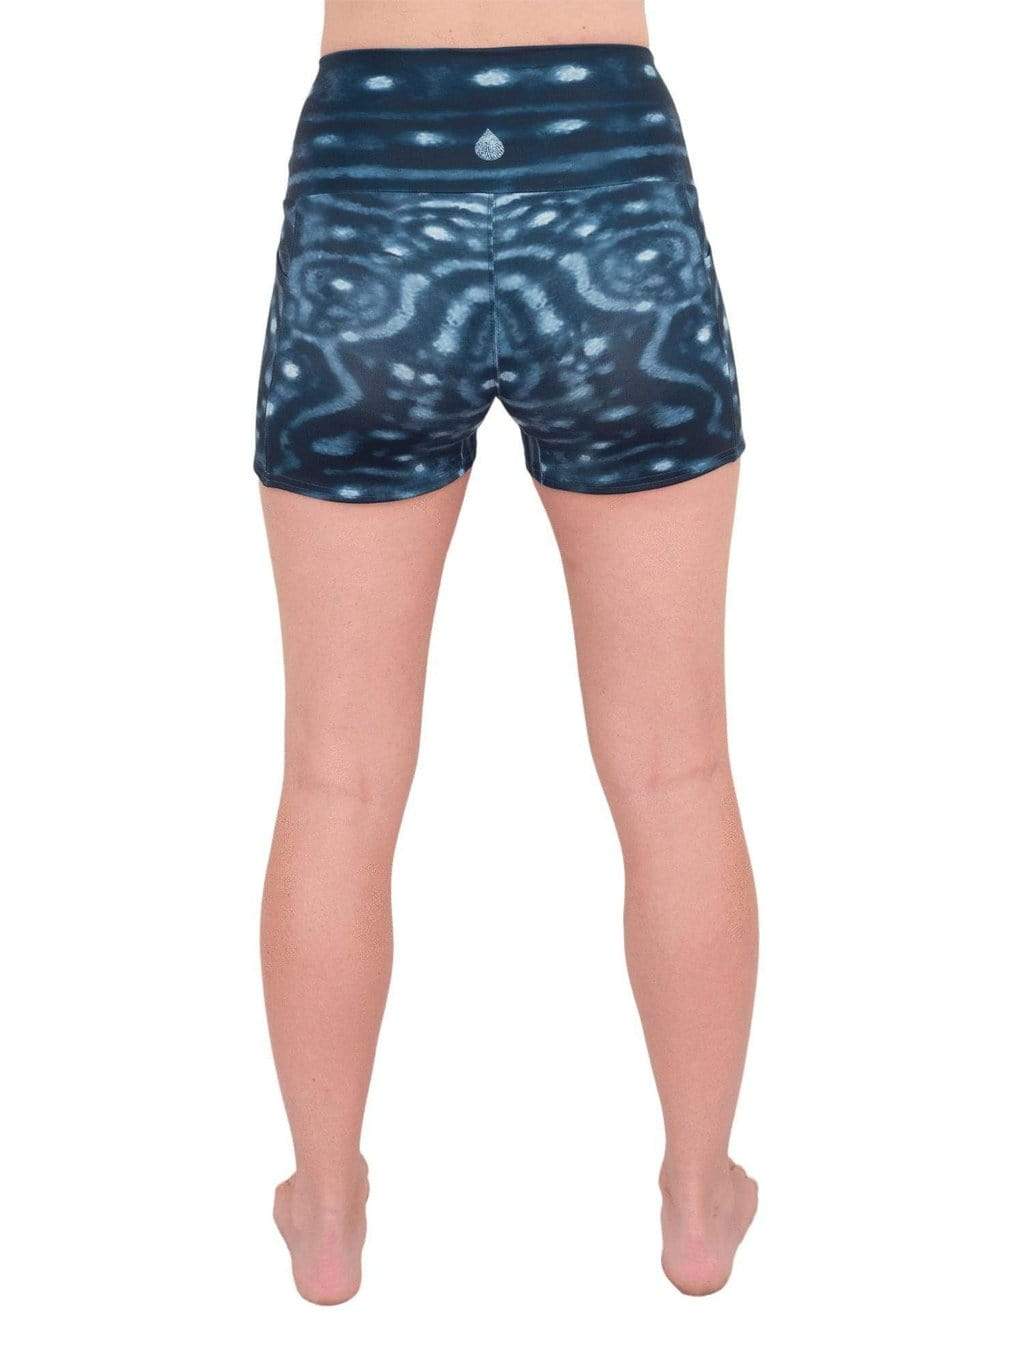 Model: Laura is our Chief Product Officer at Waterlust, a scuba diver, kiter and recreational yogi. She is 5’10, 147 lbs, 34B and is wearing a size M short.